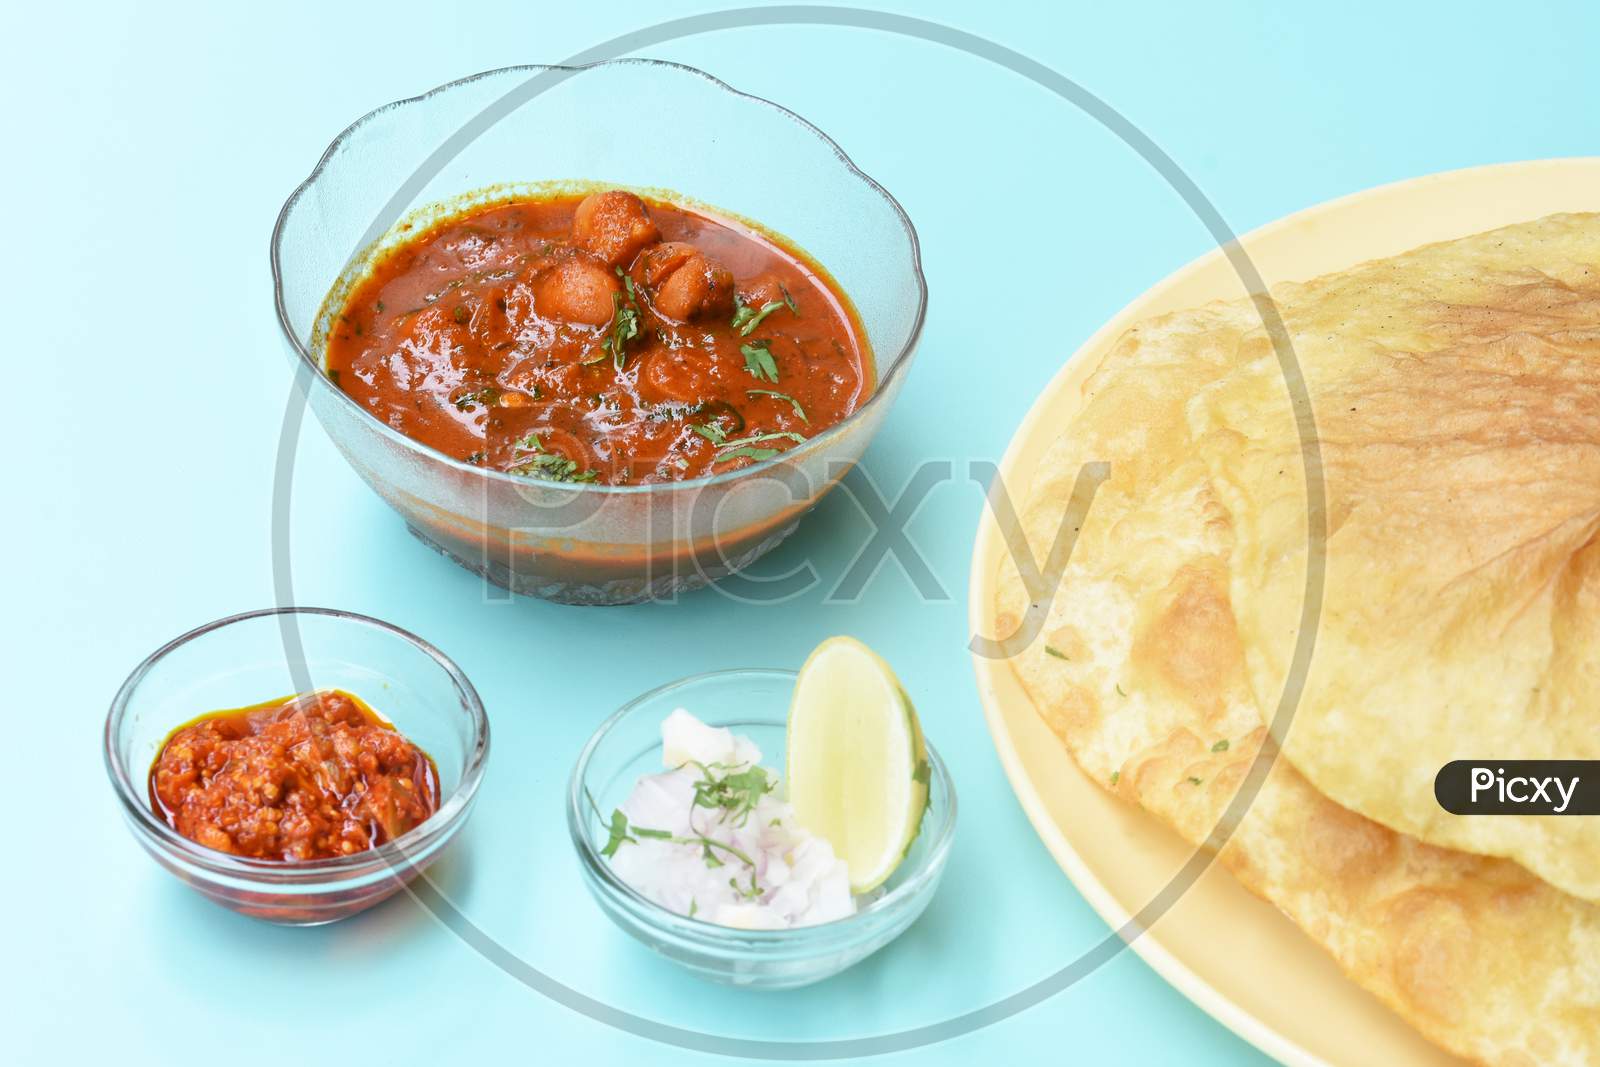 Indian Dish Spicy Chick Peas Curry Also Known As Chole Bhatura And Chana Masala Or Chole Or Chickpeas Masala Curry,Traditional North Indian Lunch Served With Fried Puri Or Flatbreads,Selective Focus